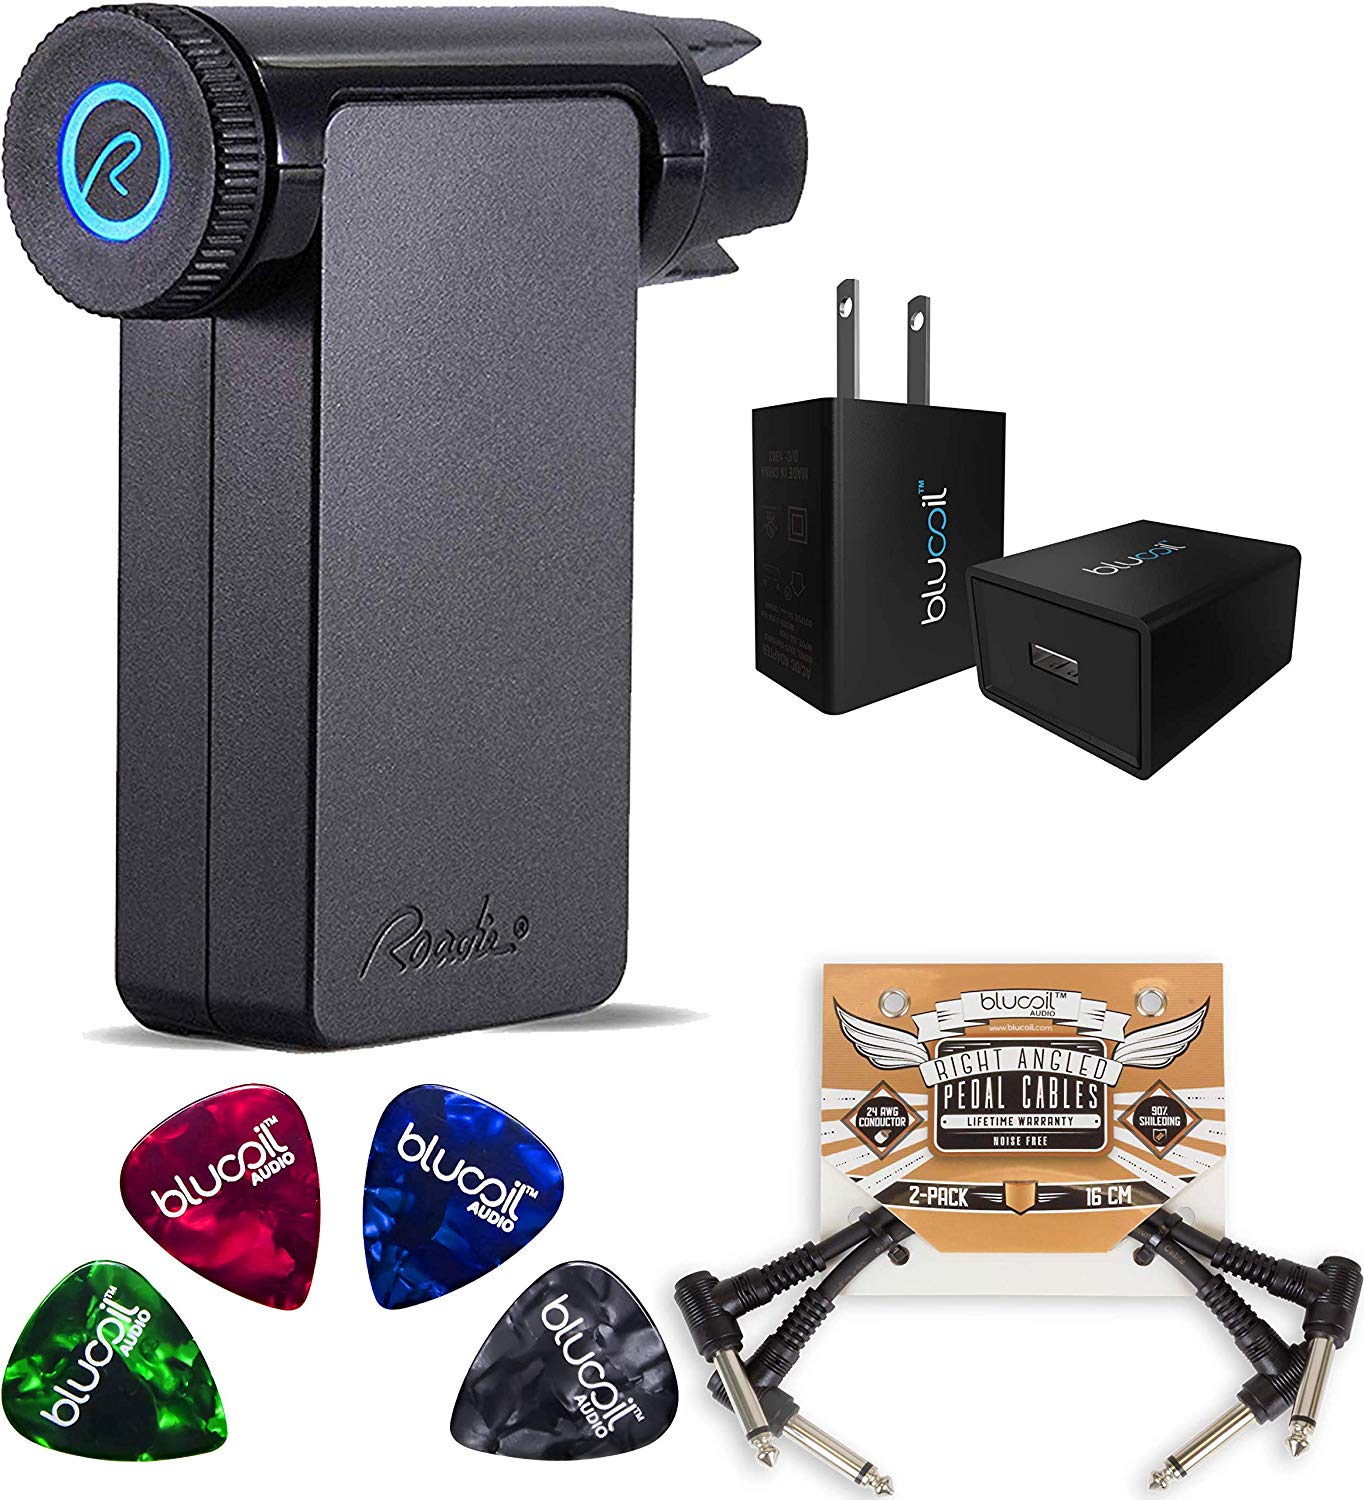 Roadie 2 RD200 Standalone Automatic Guitar Tuner Bundled With Blucoil USB Wall Adapter, 2-Pack of Pedal Patch Cables, and 4-Pack of Celluloid Guitar P 1